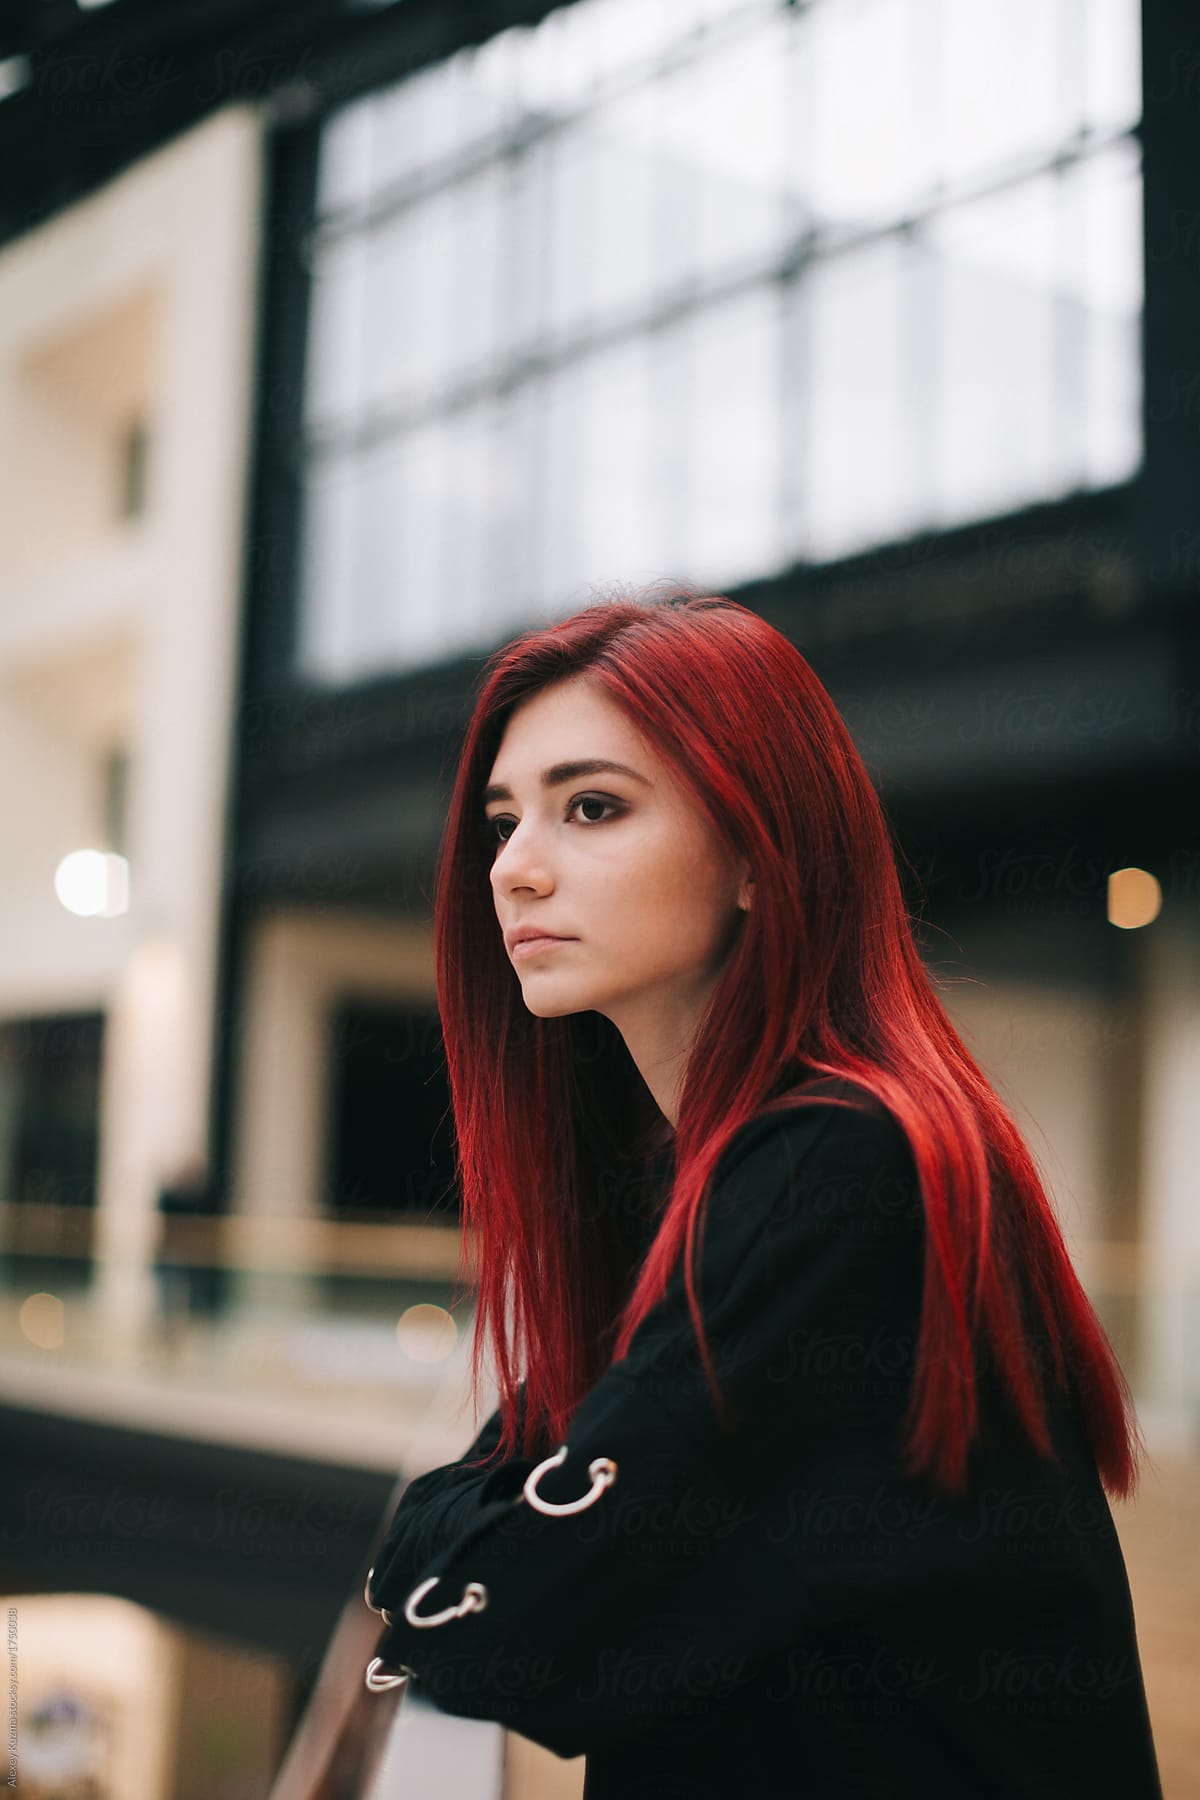 Teen Girl With Red Hair